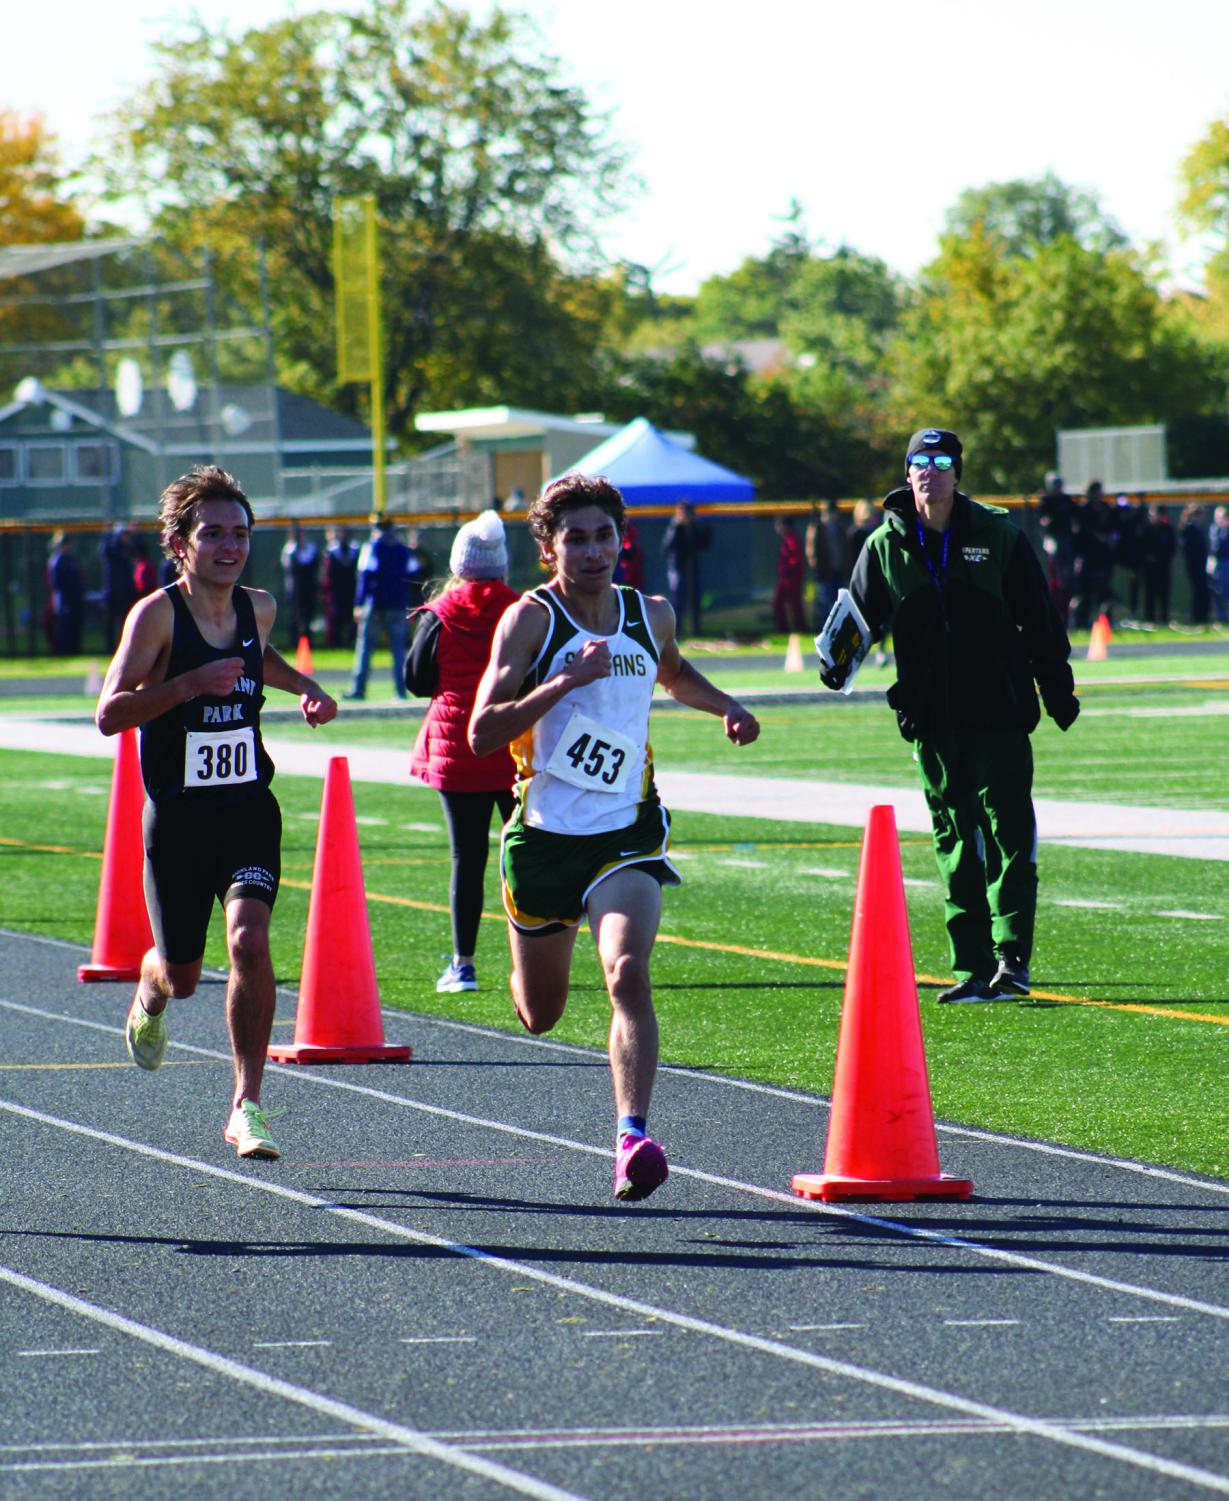 In the last 100 meters in the varsity 3-mile race, junior John Ihrke (right) outruns his competitor at the conference meet on Oct. 15. Ihrke finished seventh with a time of 15:38. Photo by Jiya Sheth.